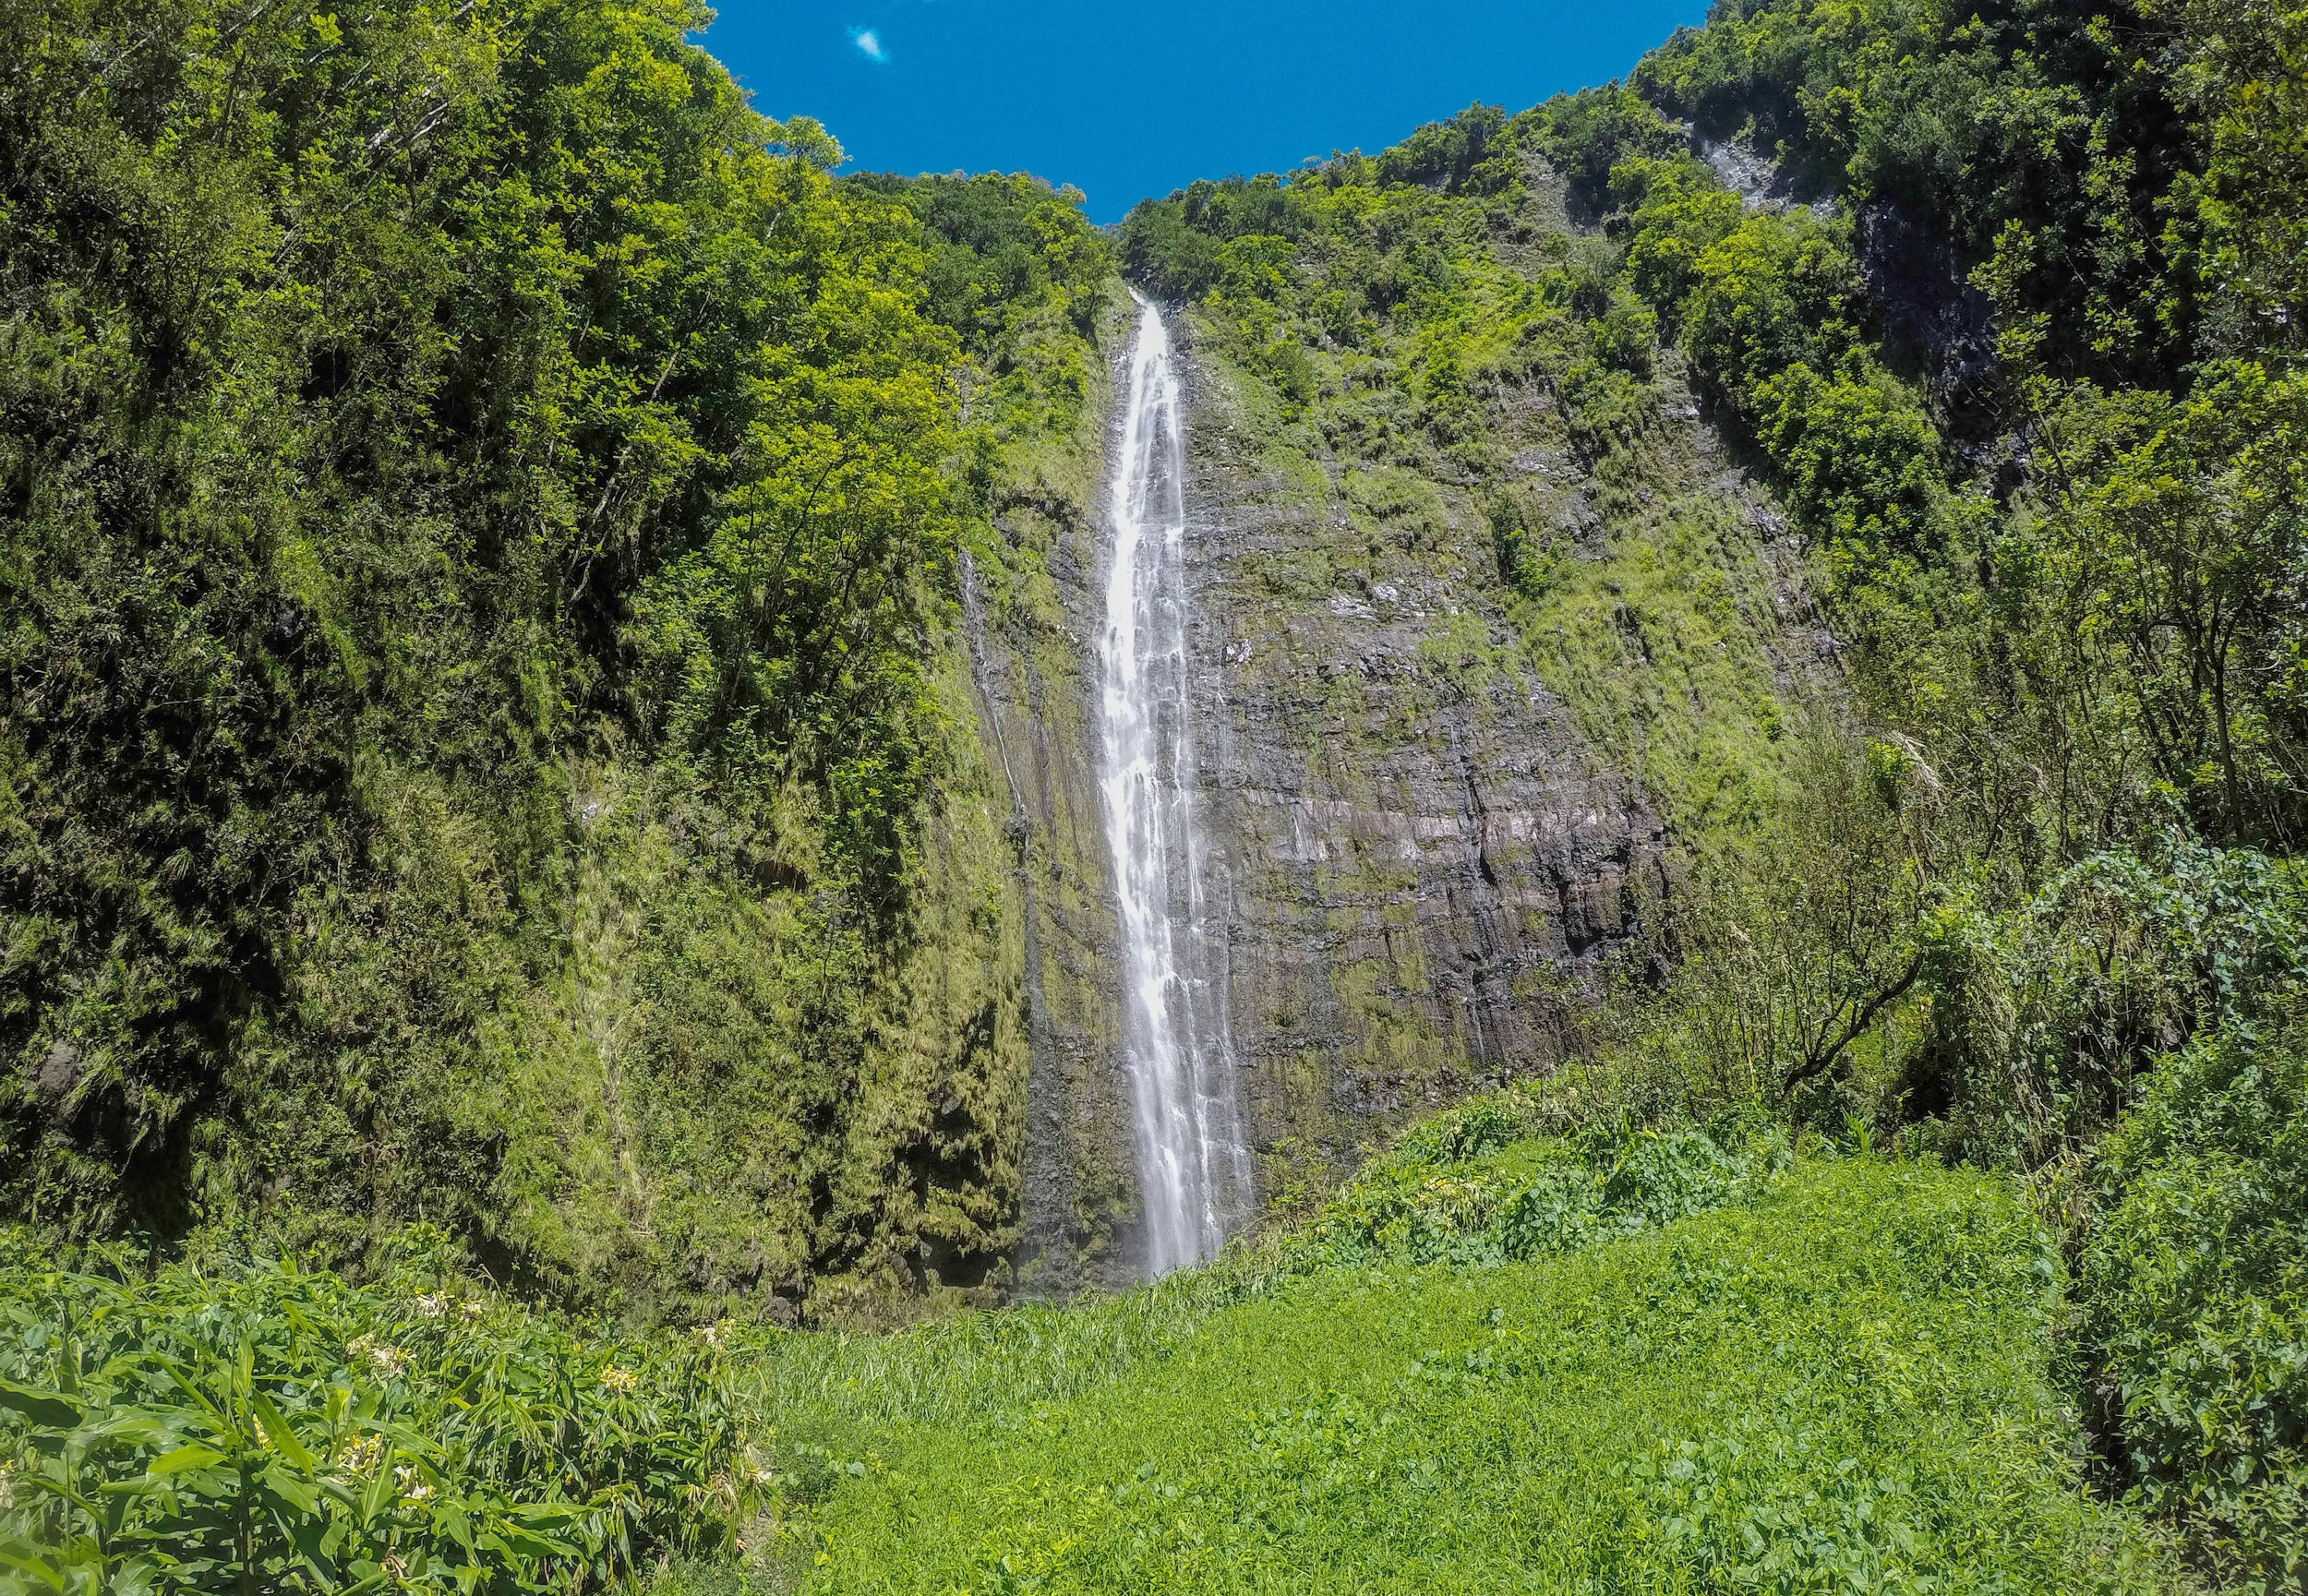 Copy of Road to Hana Stops - Waterfall - Things to do in Maui, Hawaii